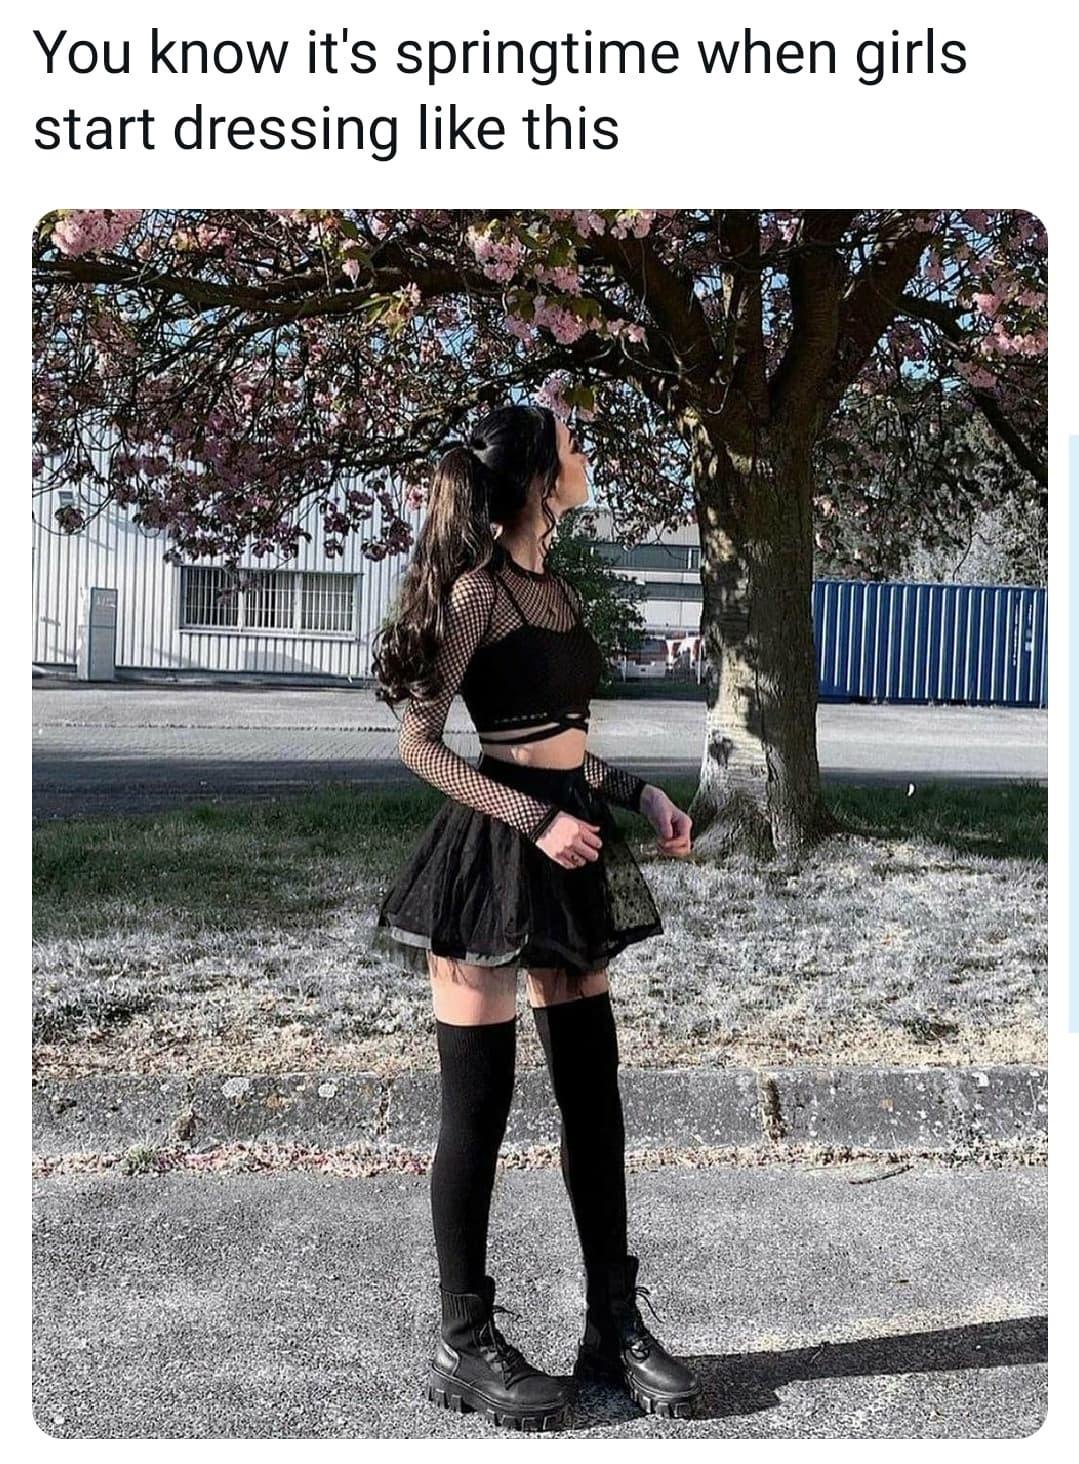 funny memes - emo girl high boots - You know it's springtime when girls start dressing this